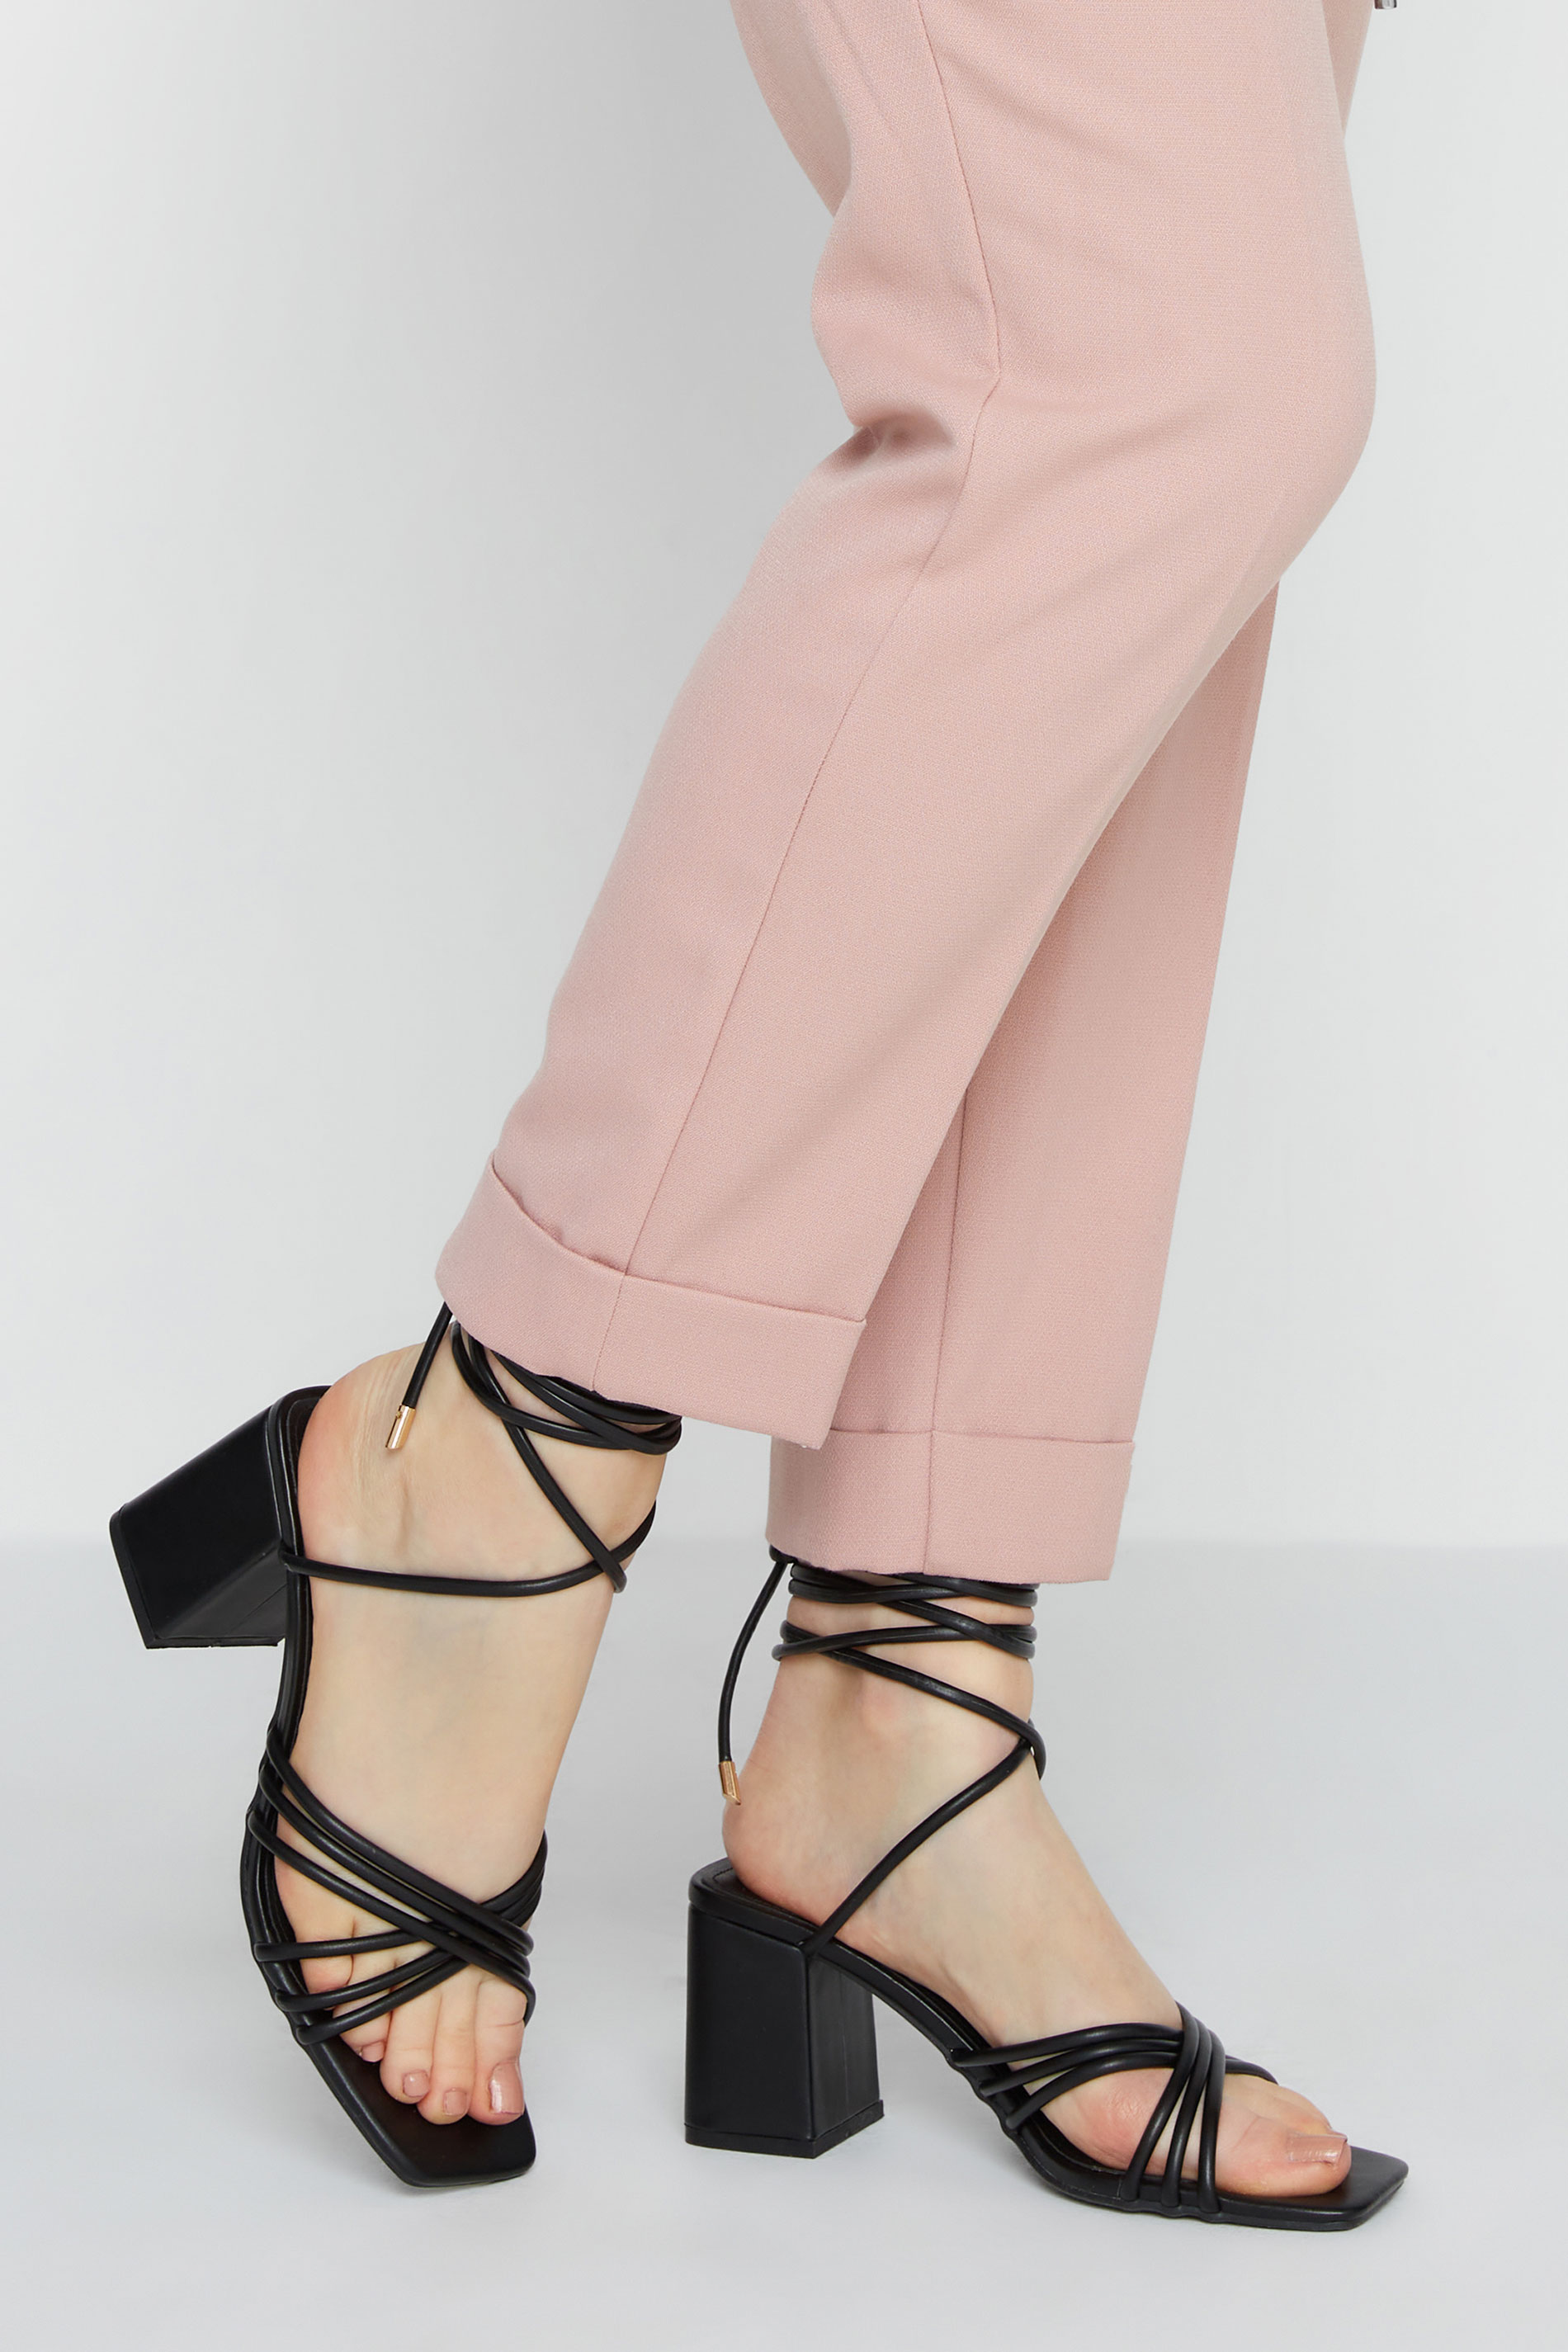 Grande taille  Shoes Grande taille  Heels | PixieGirl Black Strappy Lace Up Block Heels In Standard D Fit - FA60504